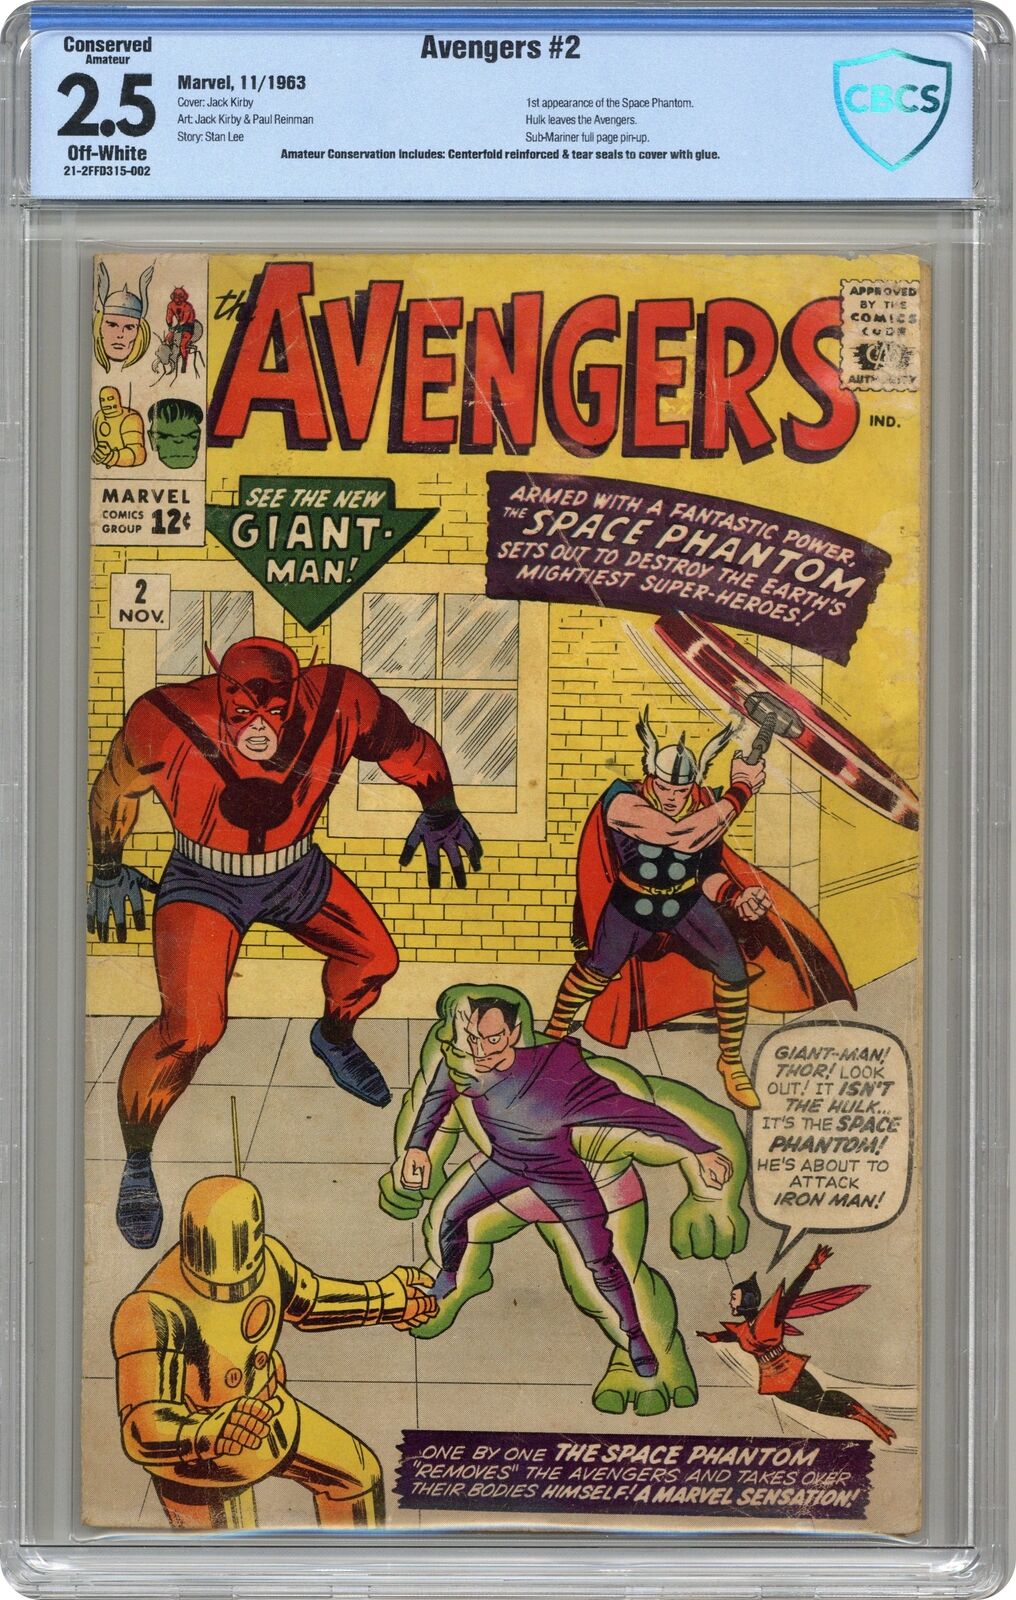 Avengers #2 CBCS 2.5 CONSERVED 1963 21-2FFD315-002